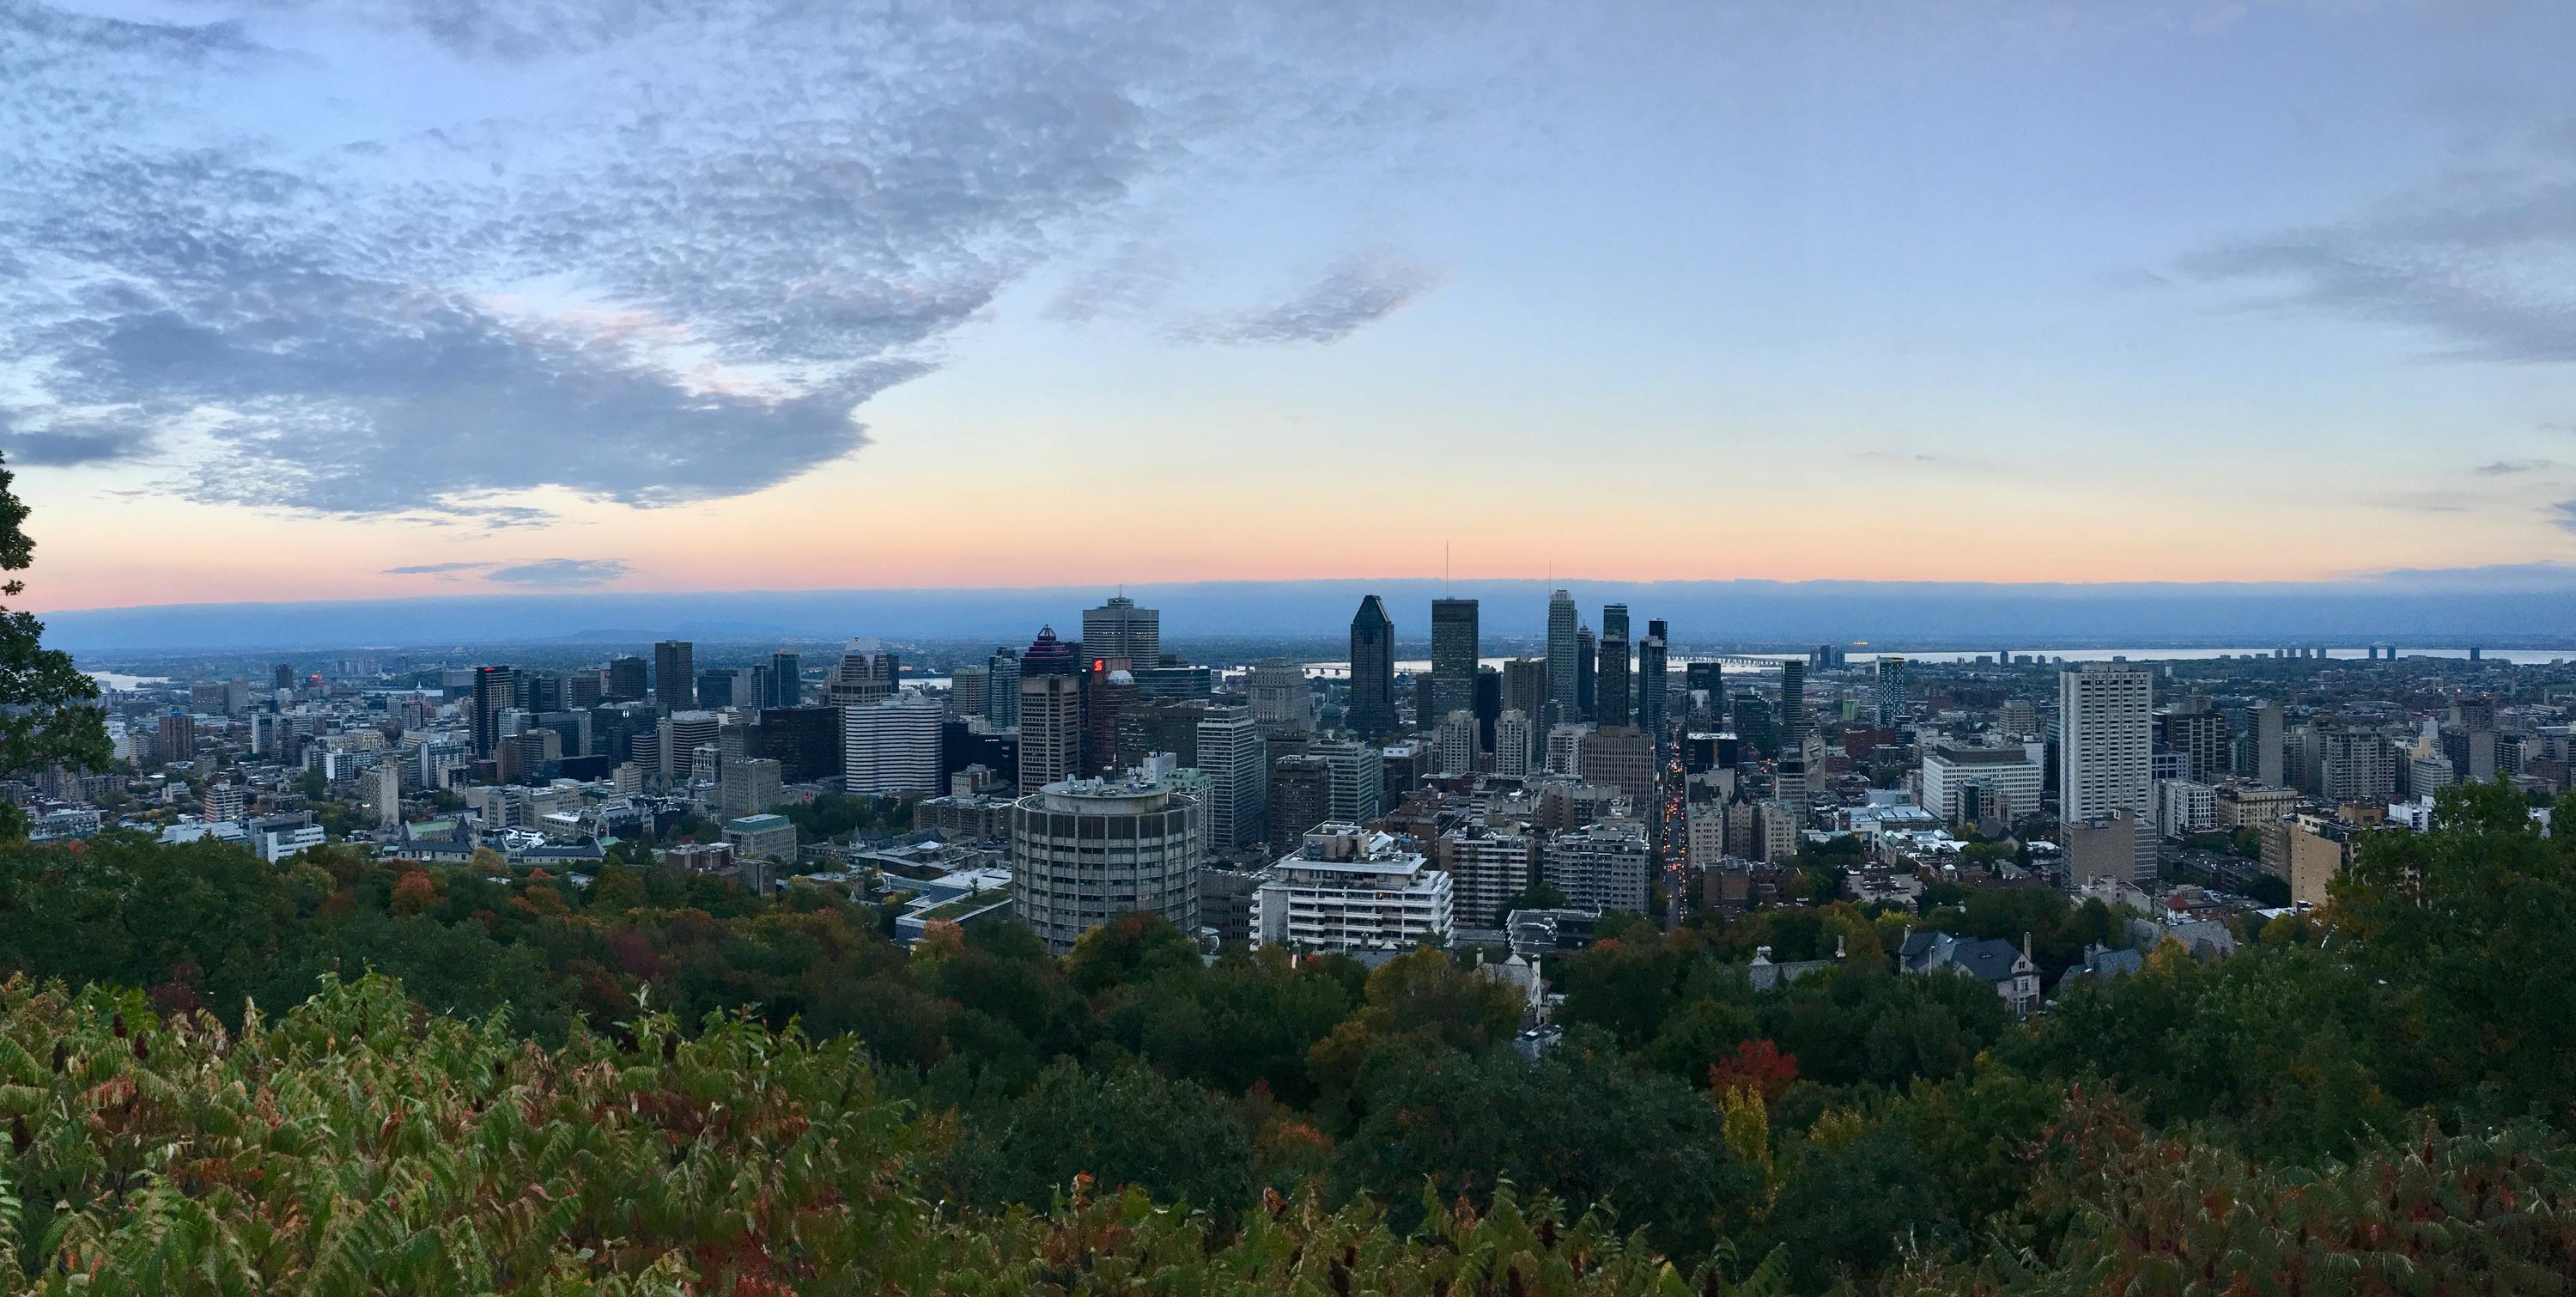 The skyline at Mont Royal, Montreal.